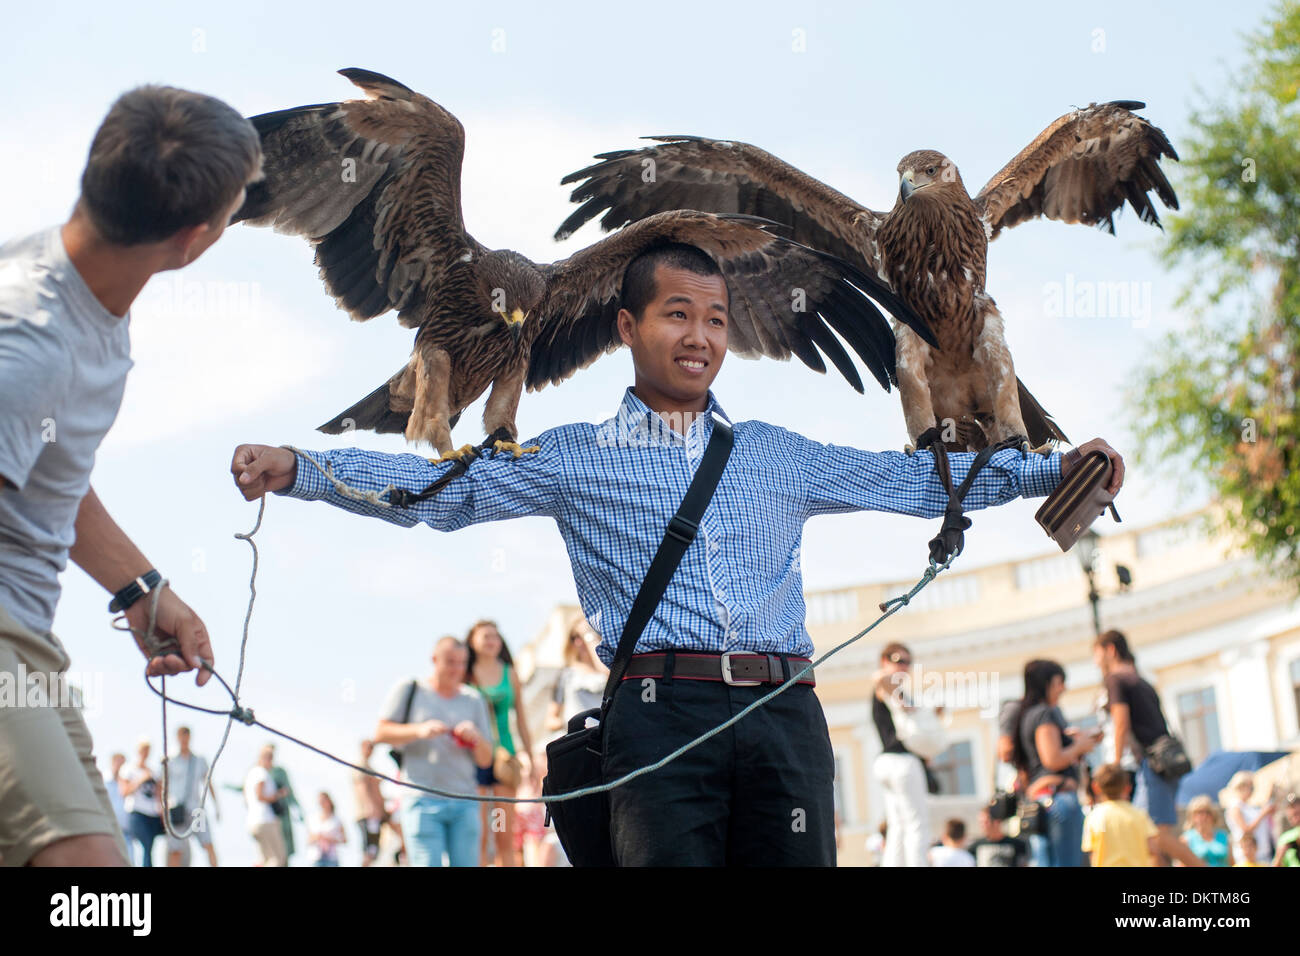 Tourist being photographed with eagles on the Potemkin Stairs in Odessa, Ukraine. Stock Photo